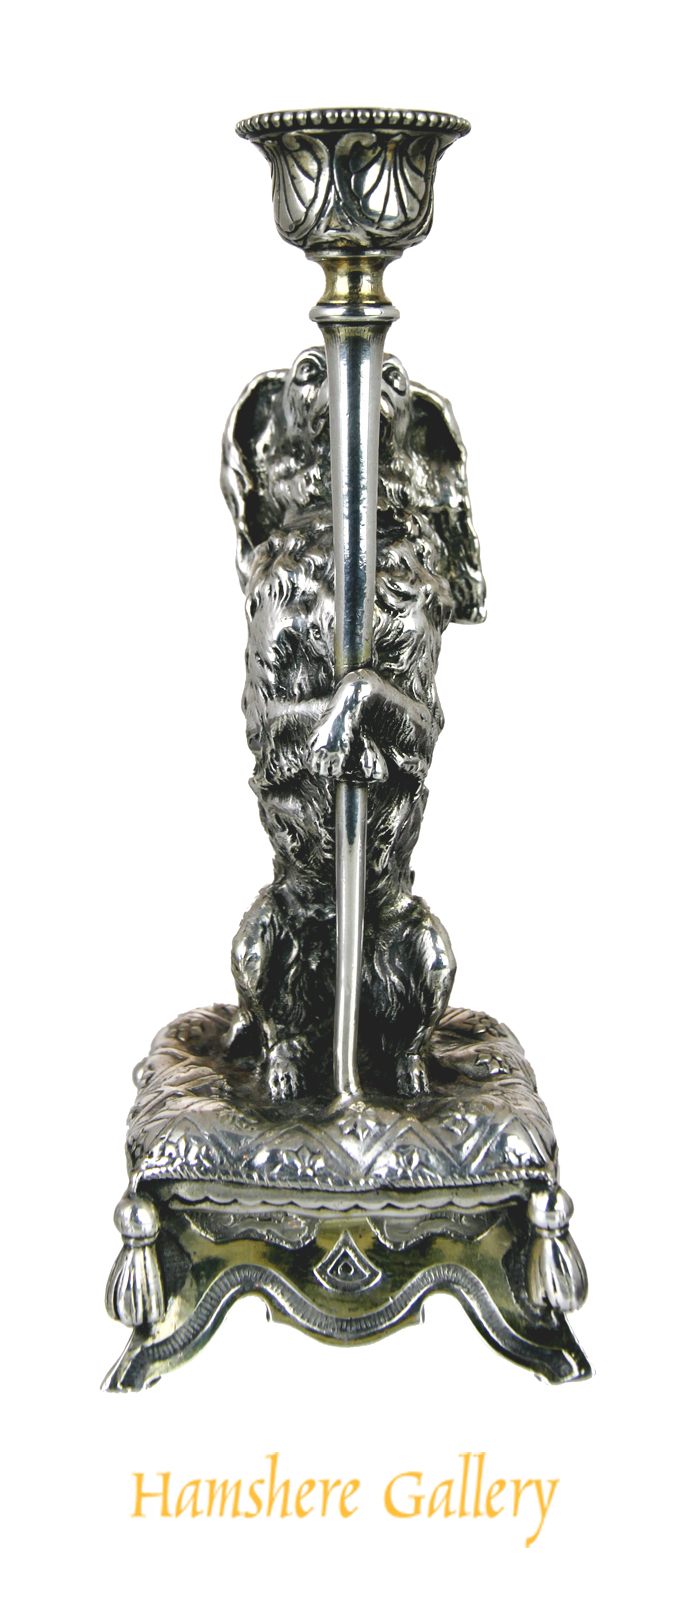 Click for larger image: A rare mid 19th century silver plated King Charles Cavalier Spaniel taperstick / candlestick by Elkington & Co, after John Bell (English, 1811-1895) - A rare mid 19th century silver plated King Charles Cavalier Spaniel taperstick / candlestick by Elkington & Co, after John Bell (English, 1811-1895)